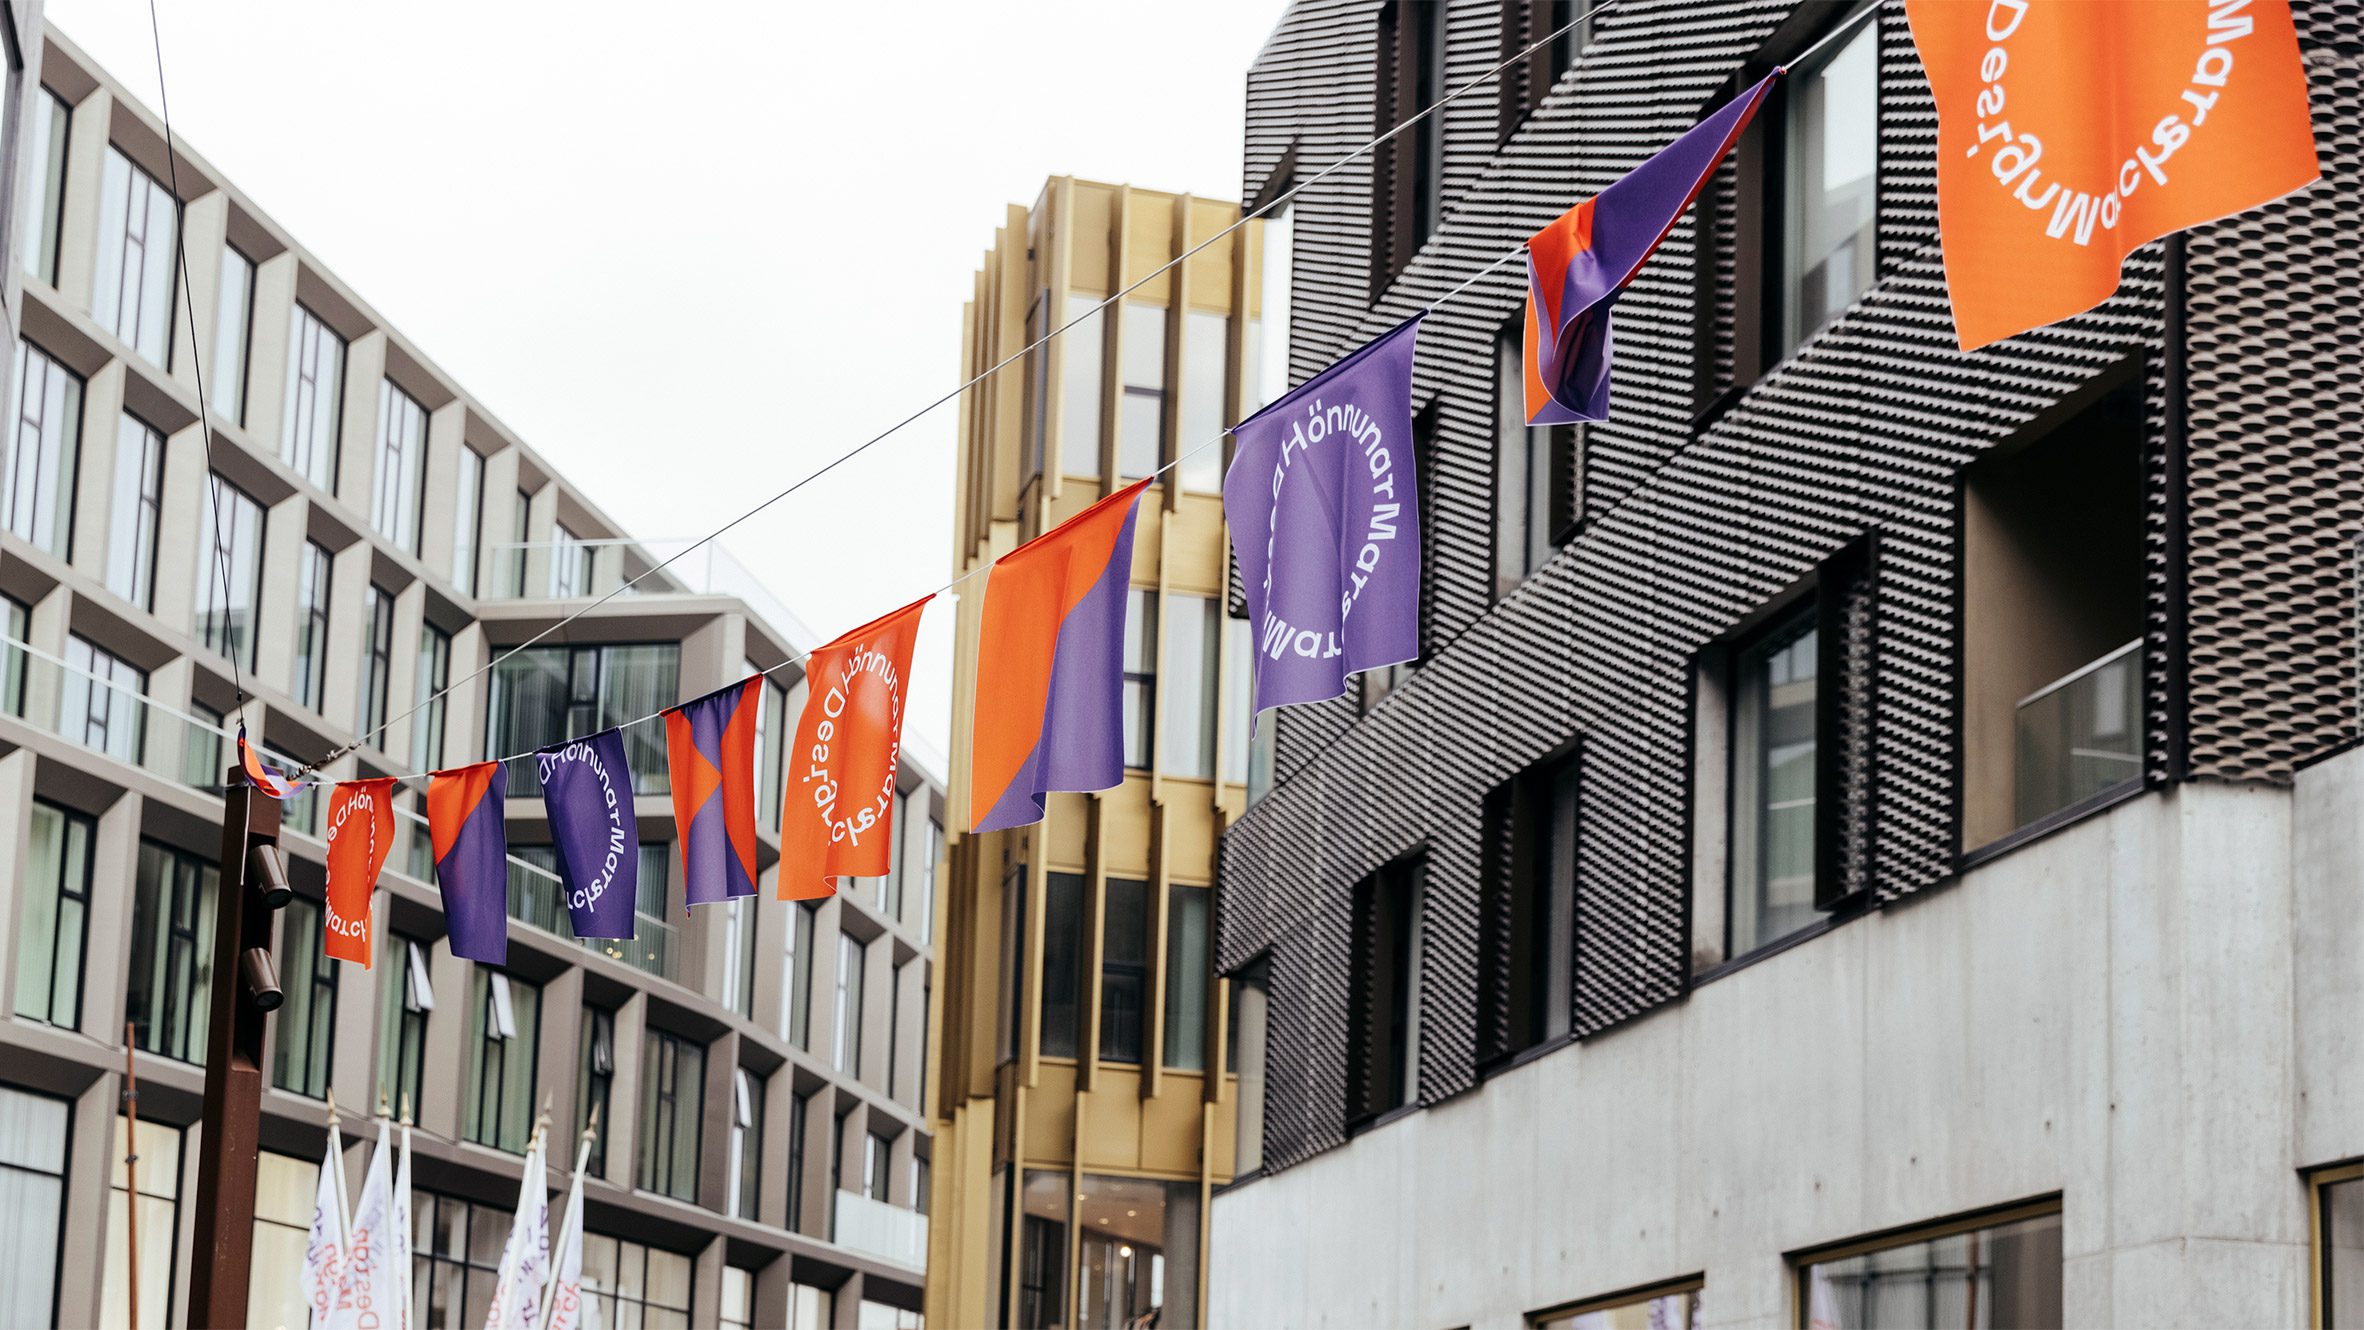 Photo of DesignMarch flags